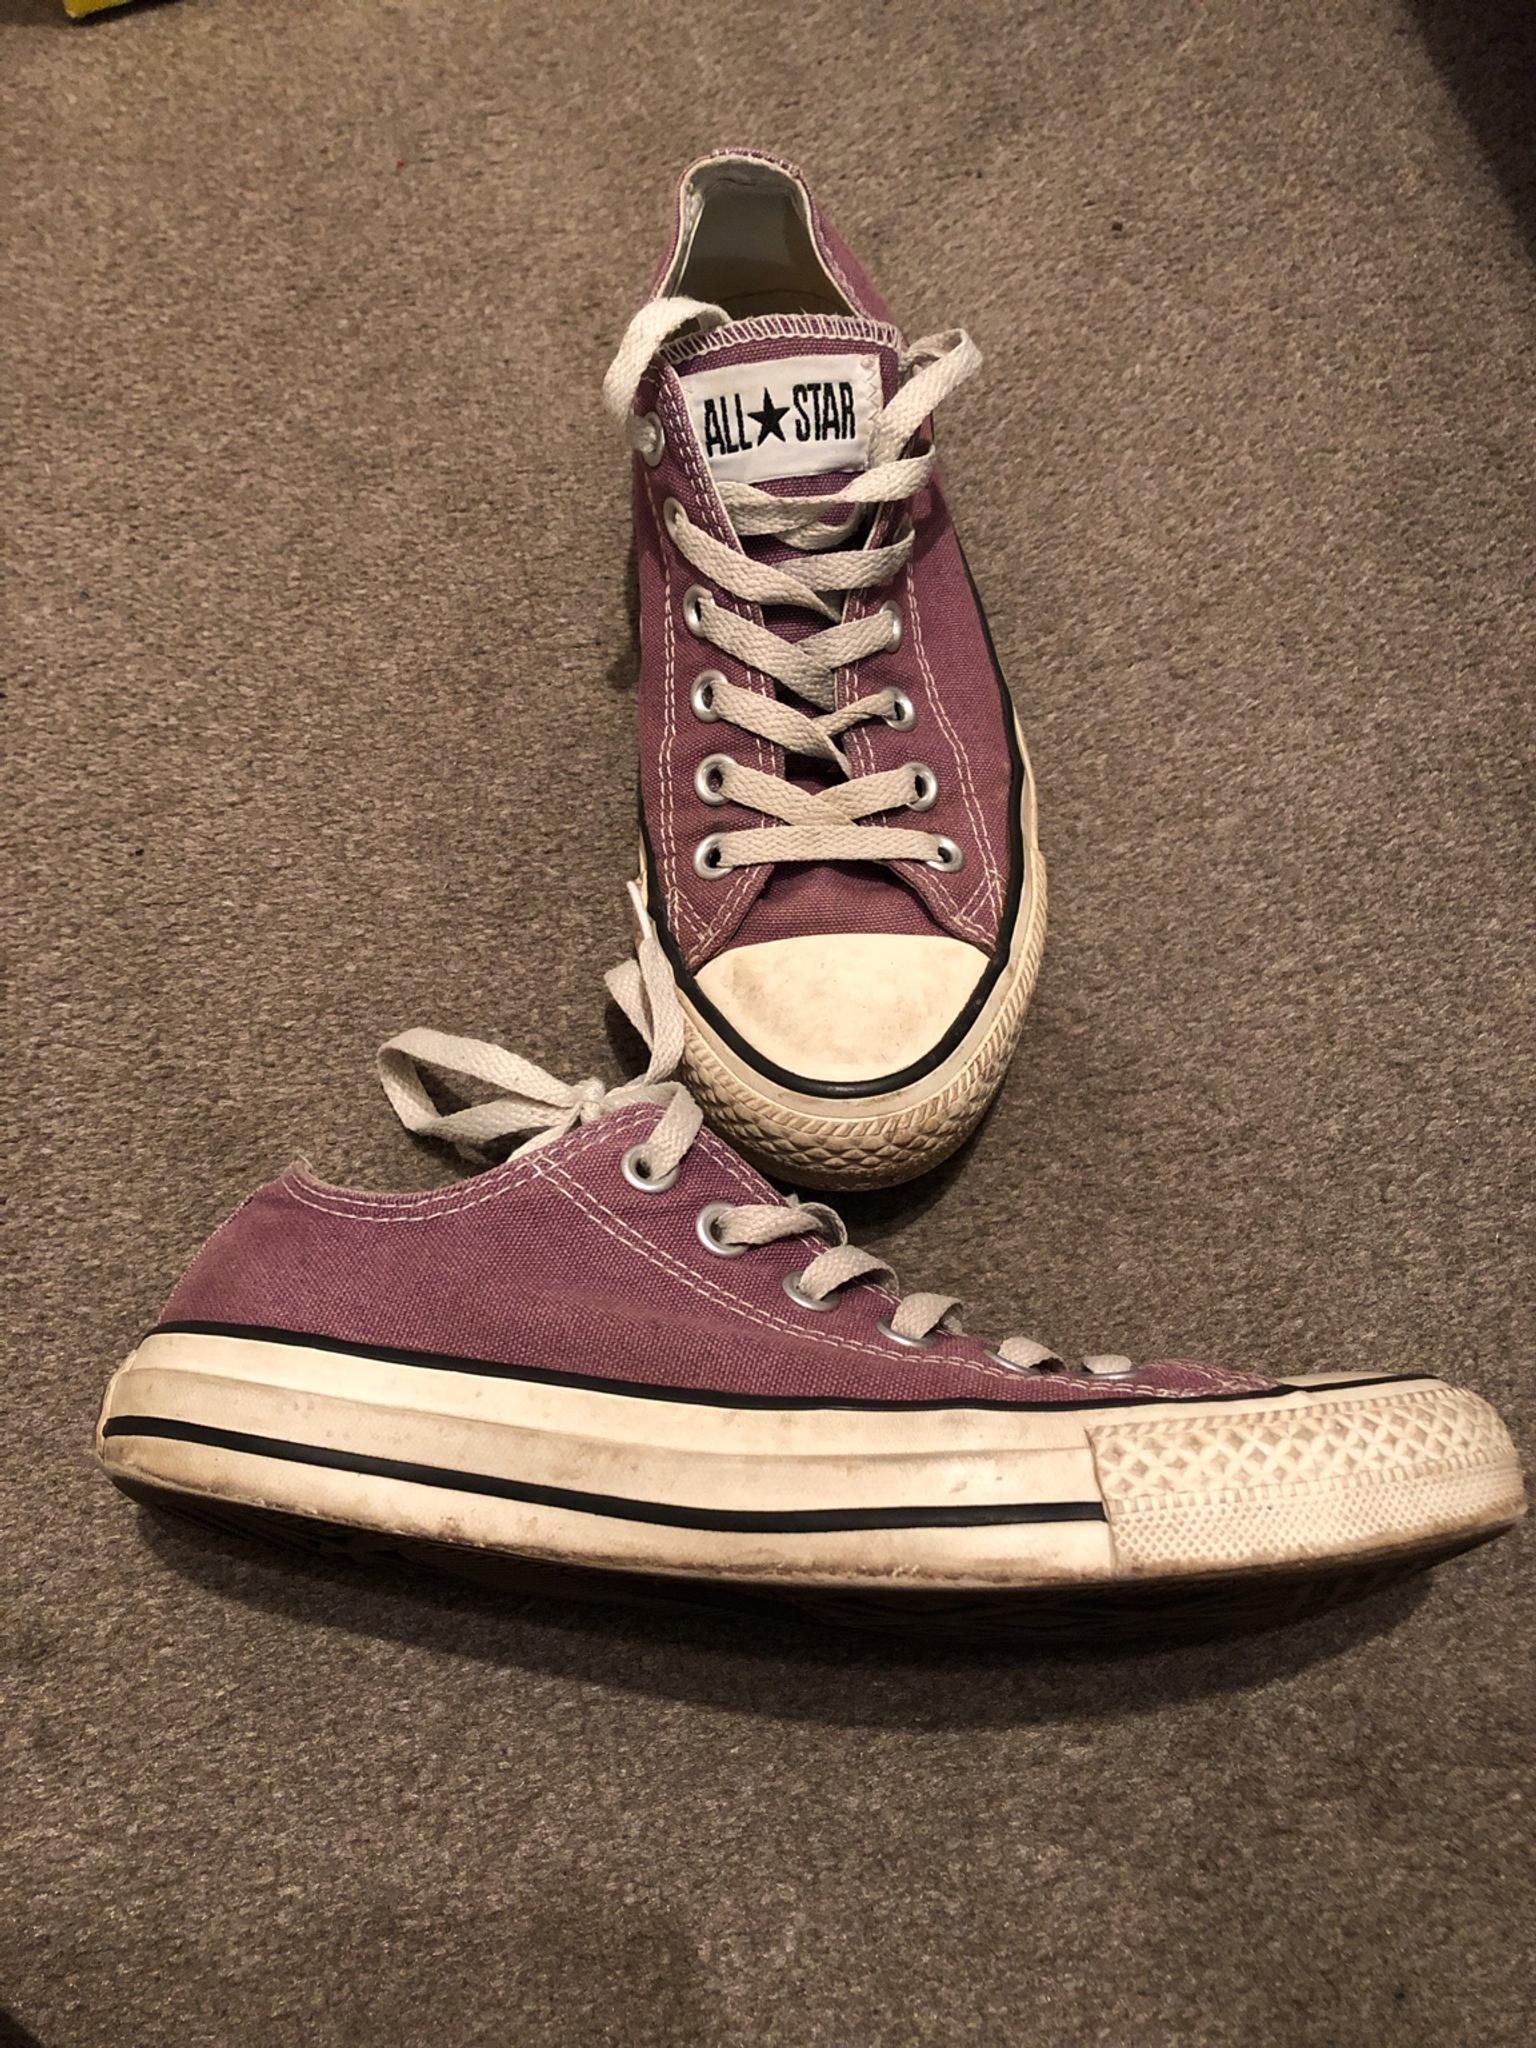 all star converse size 5